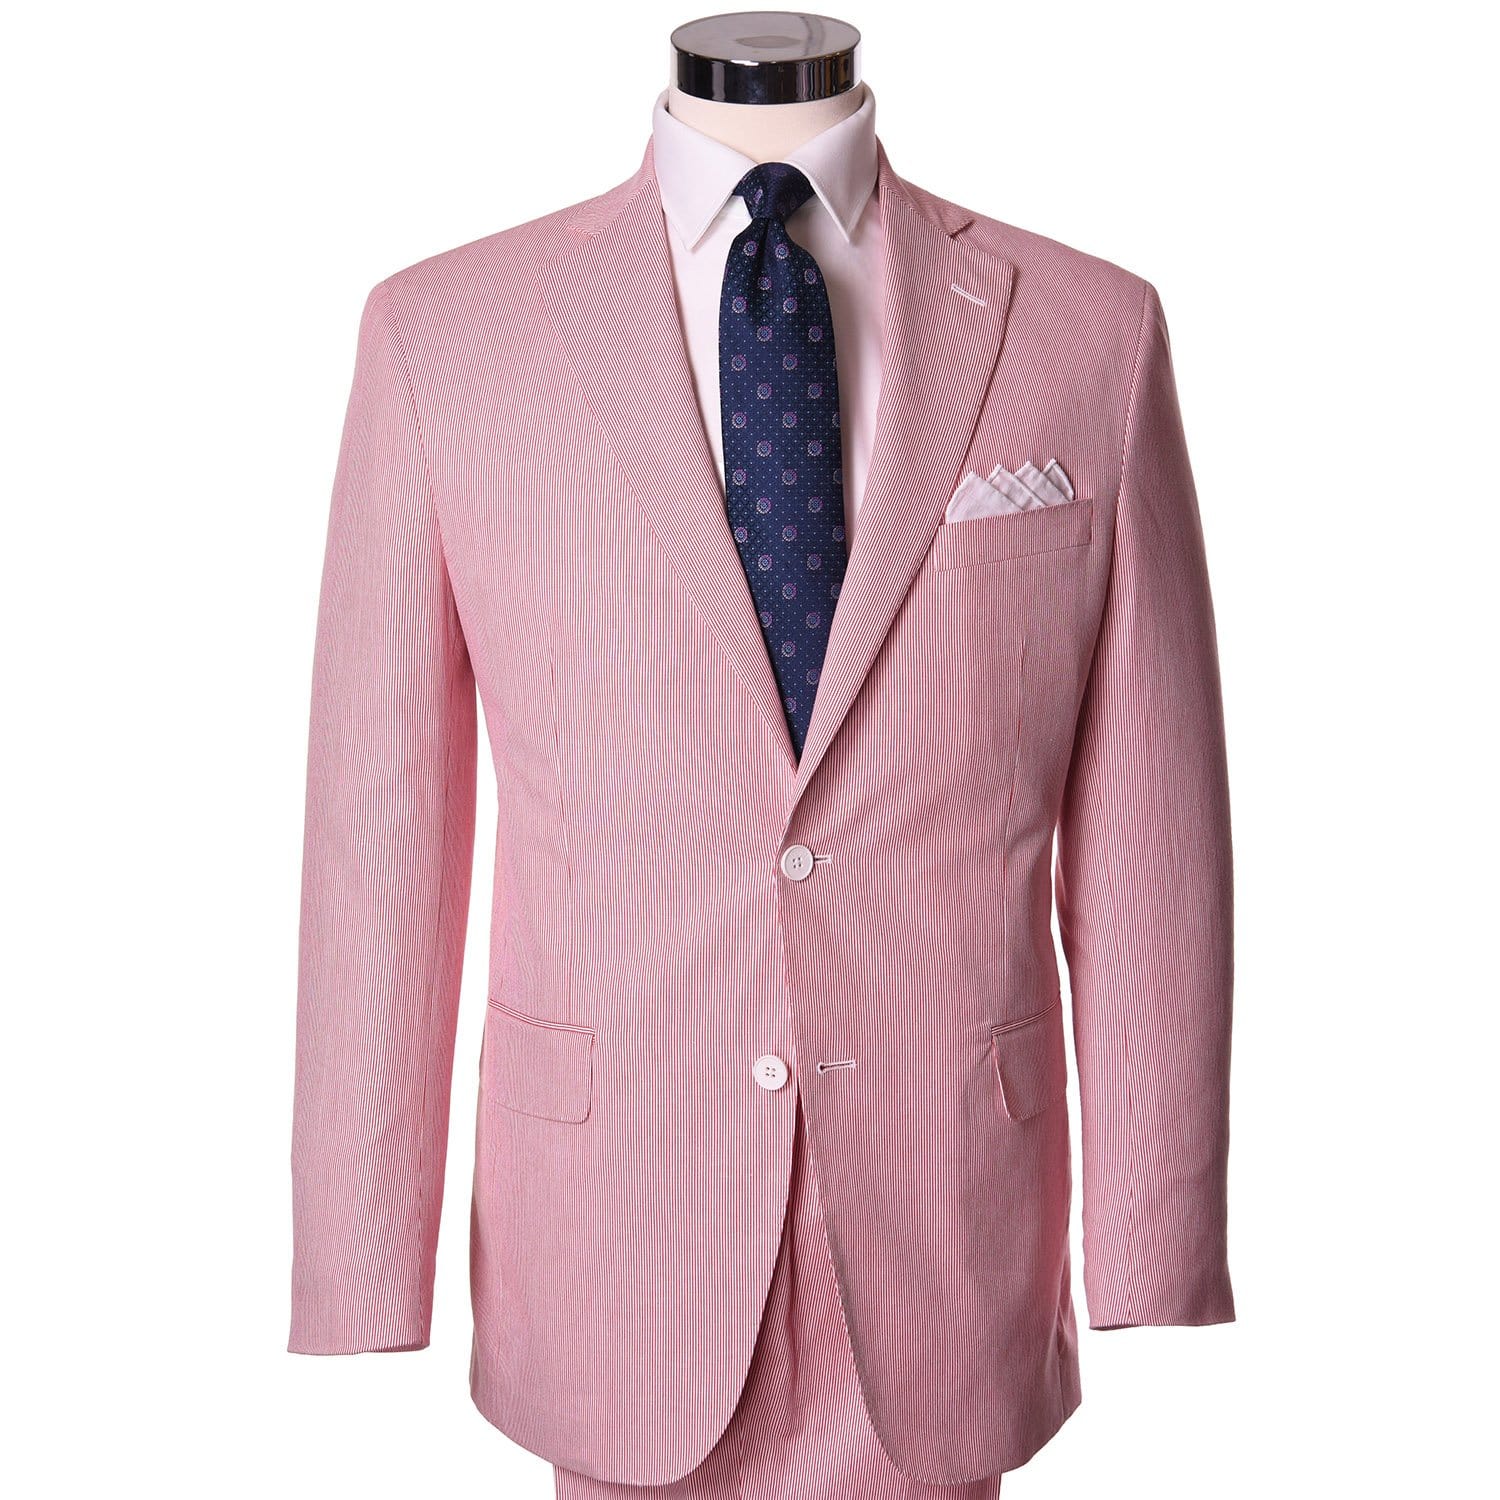 Remoulaude Red Pincord Sport Coat - Haspel Clothing